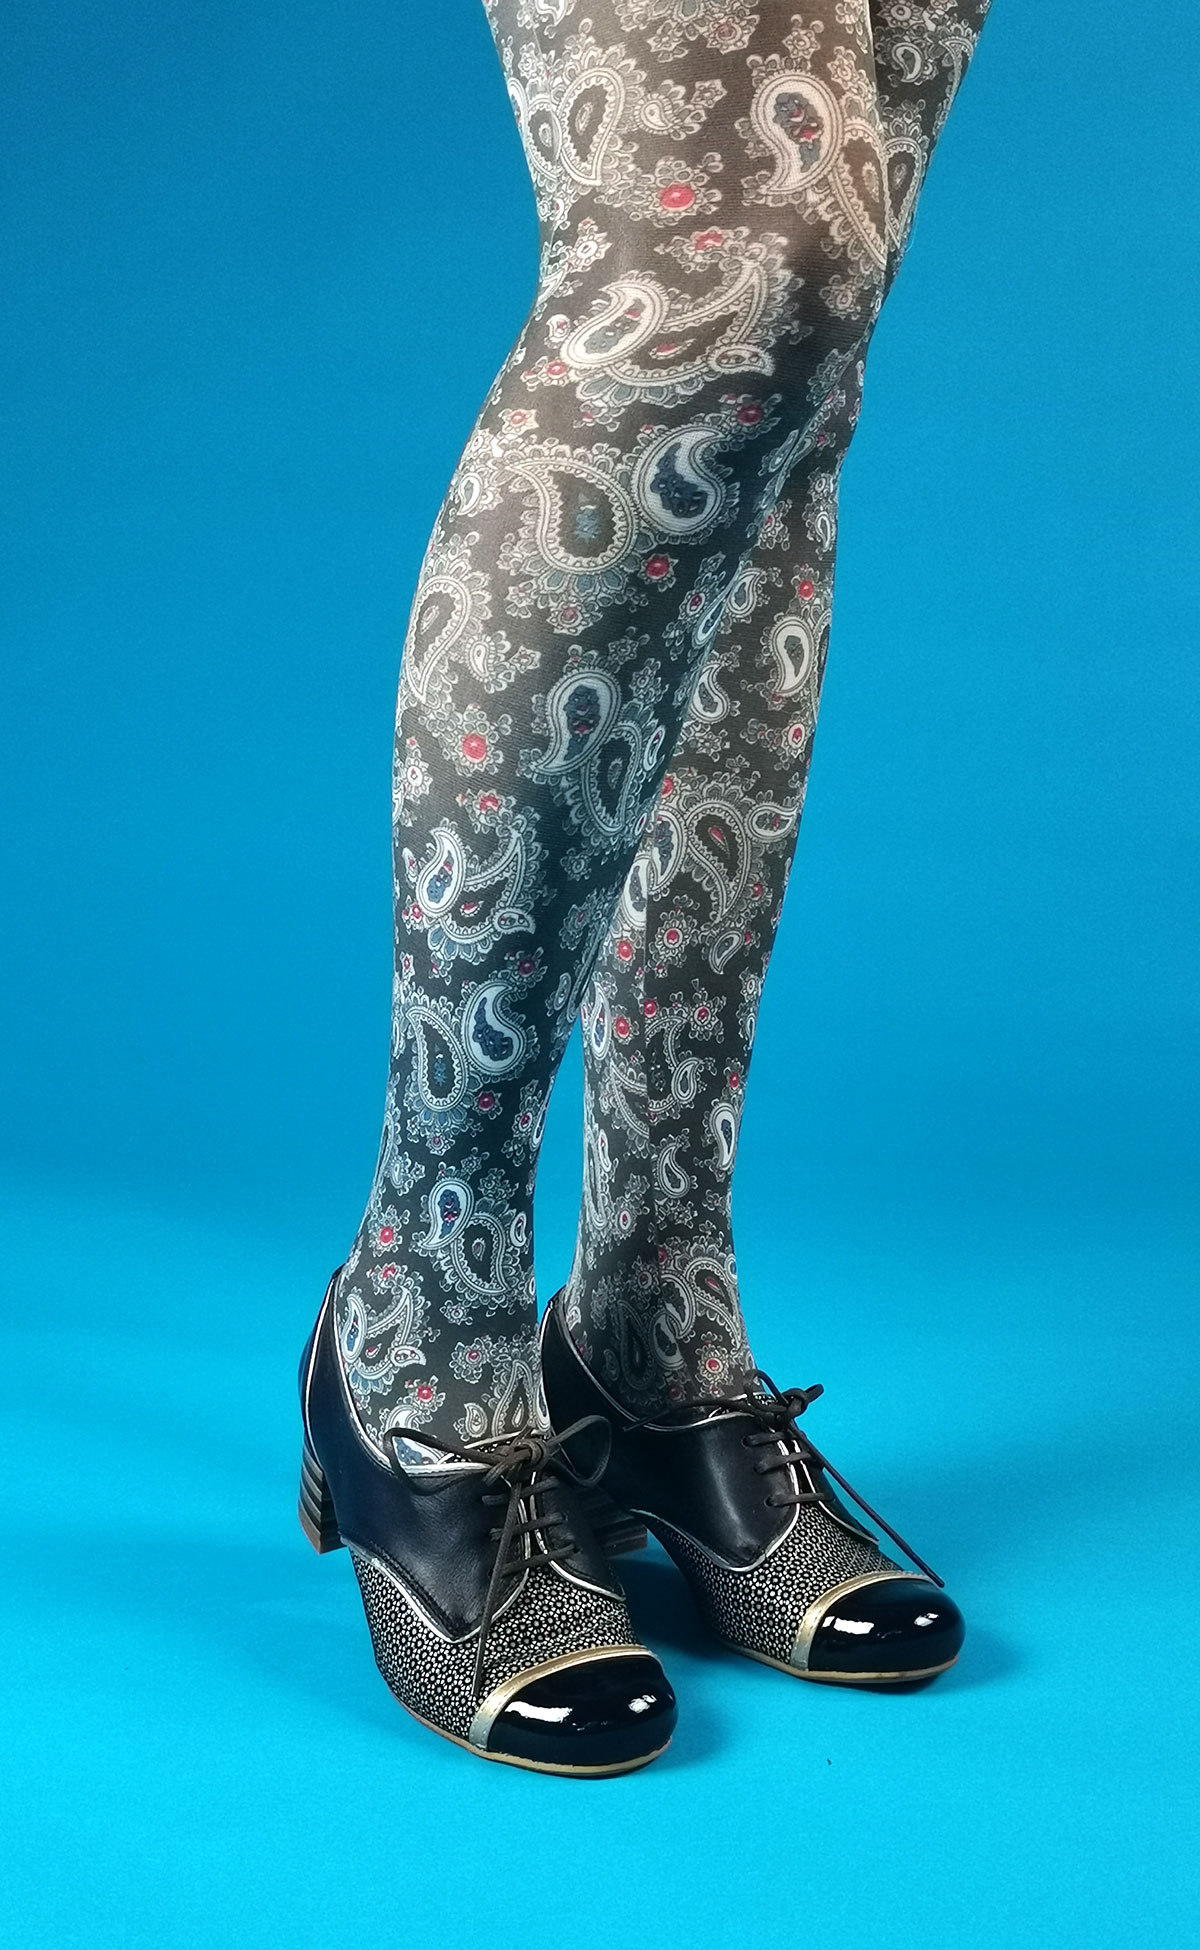 Paisley Tights – vintage retro 60's – 70's style – Mod Shoes